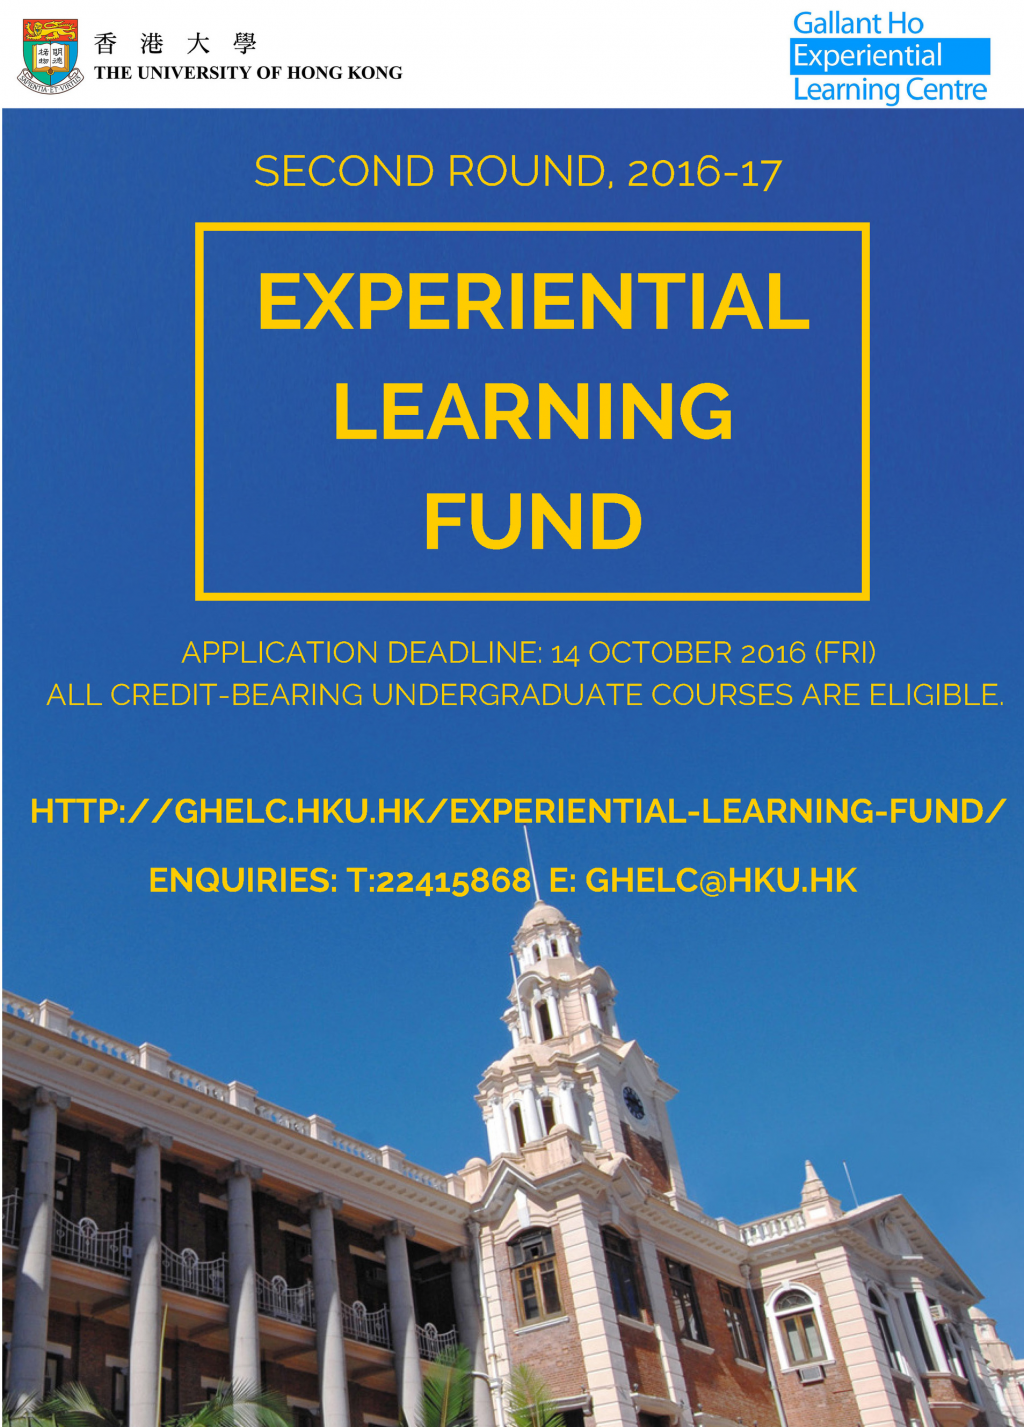 Experiential Learning Fund (2nd Round, 2016-17): Call for Applications